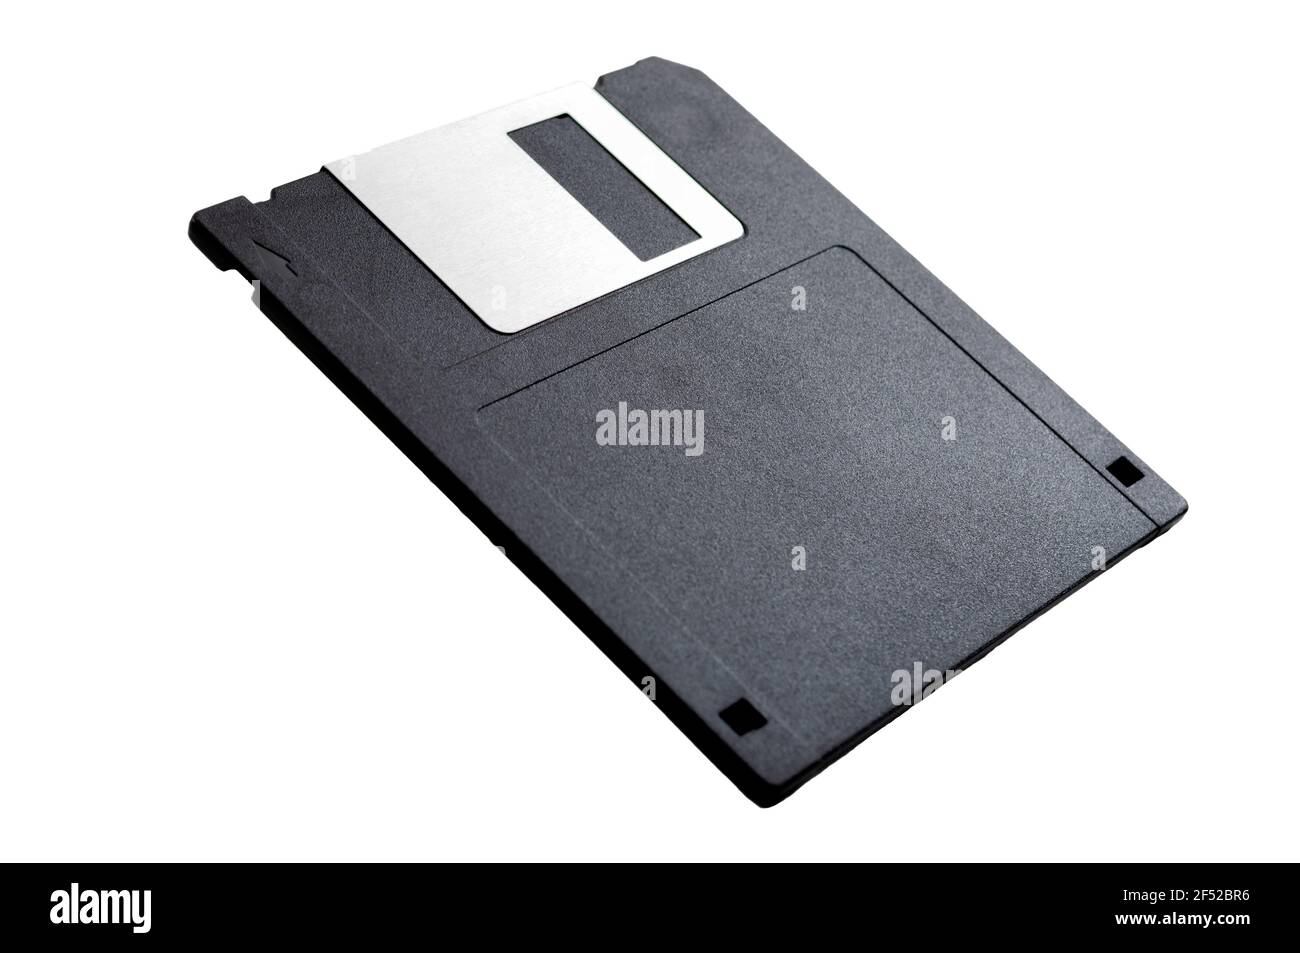 Obsolete data storage technology, retro digital medium and nostalgia concept with a tilted floppy disk isolated on white background leaning on its axi Stock Photo